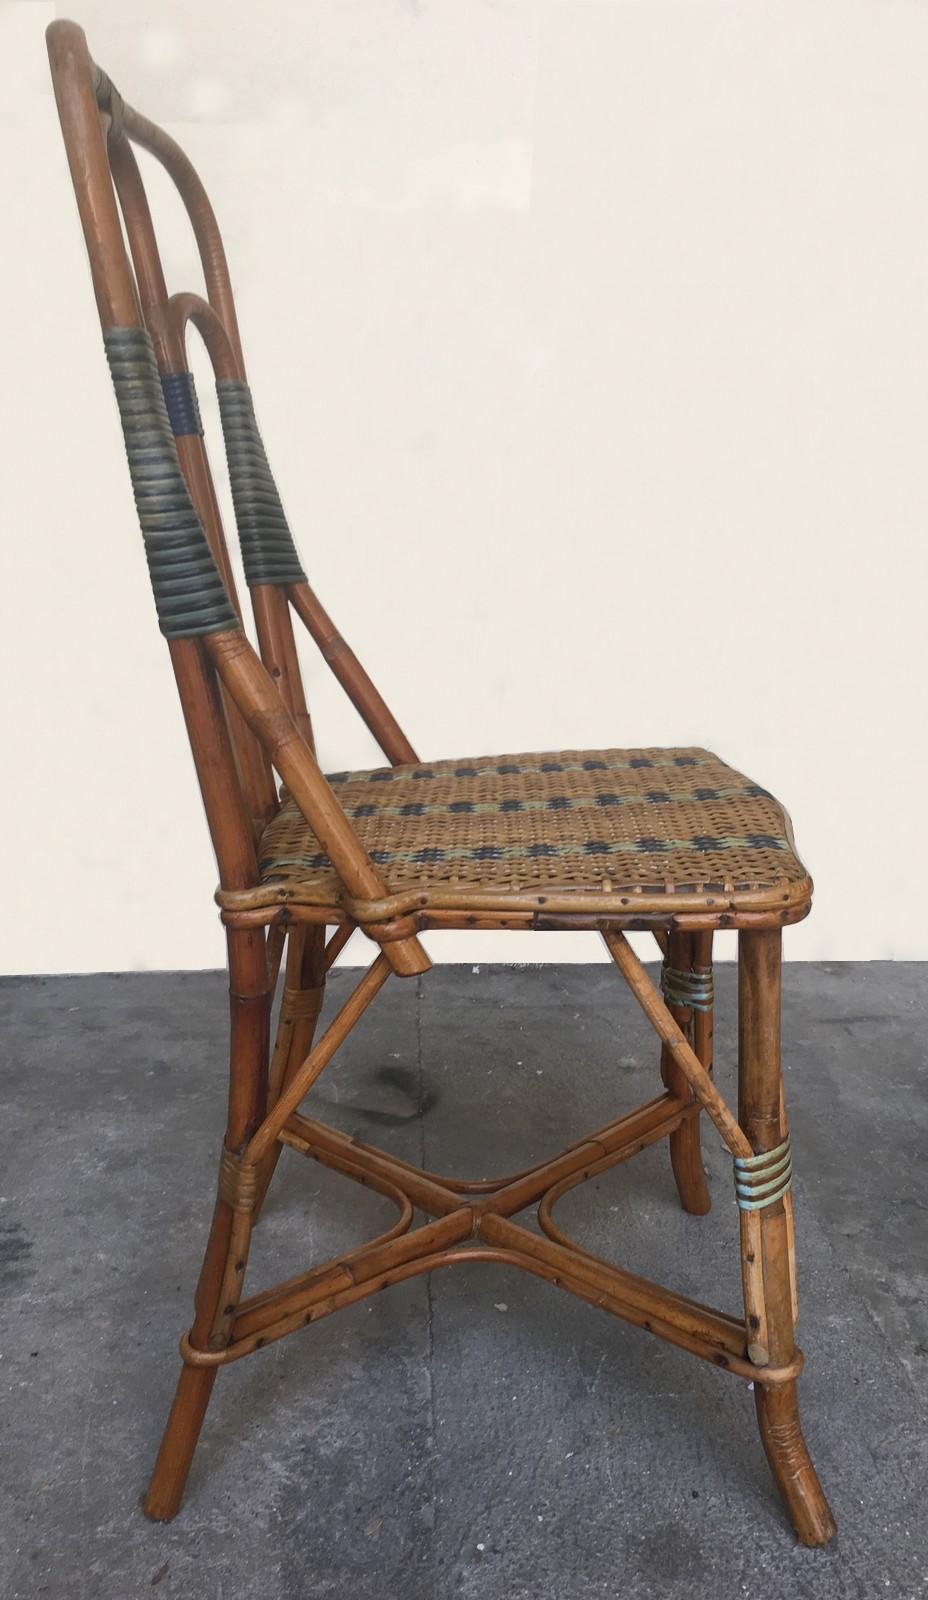 A set of six winter garden dining chairs in bamboo and rattan, in excellent condition.
Maison M Murard in Lyon, France, circa 1930. With the manufacturer's original plate.